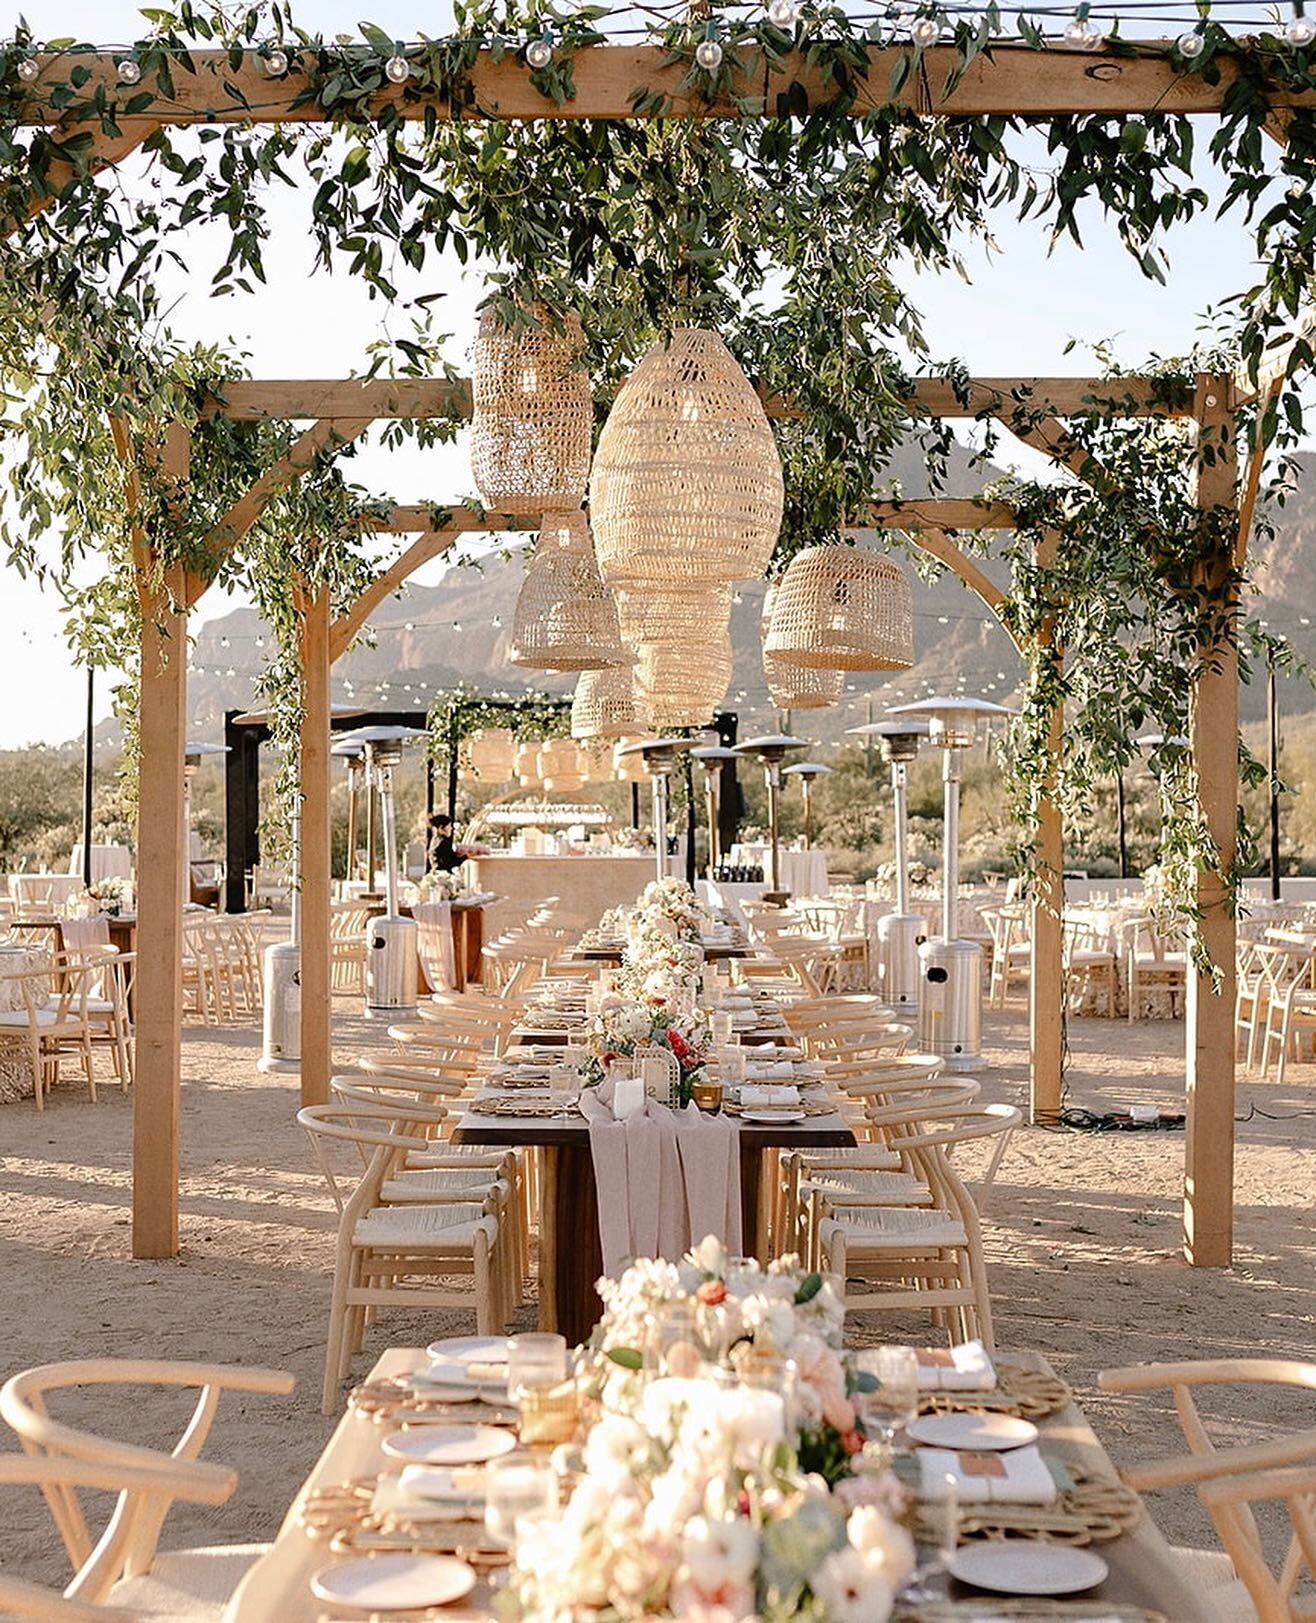 There aren&rsquo;t enough swiffers in the world to get all the dust off our chairs and tables, but we&rsquo;d do it a million times over to be a part of this incredible event 😍

Live Edge Tables
Rope Wishbone Chairs
Linen Wishbone Chairs
Live Edge S